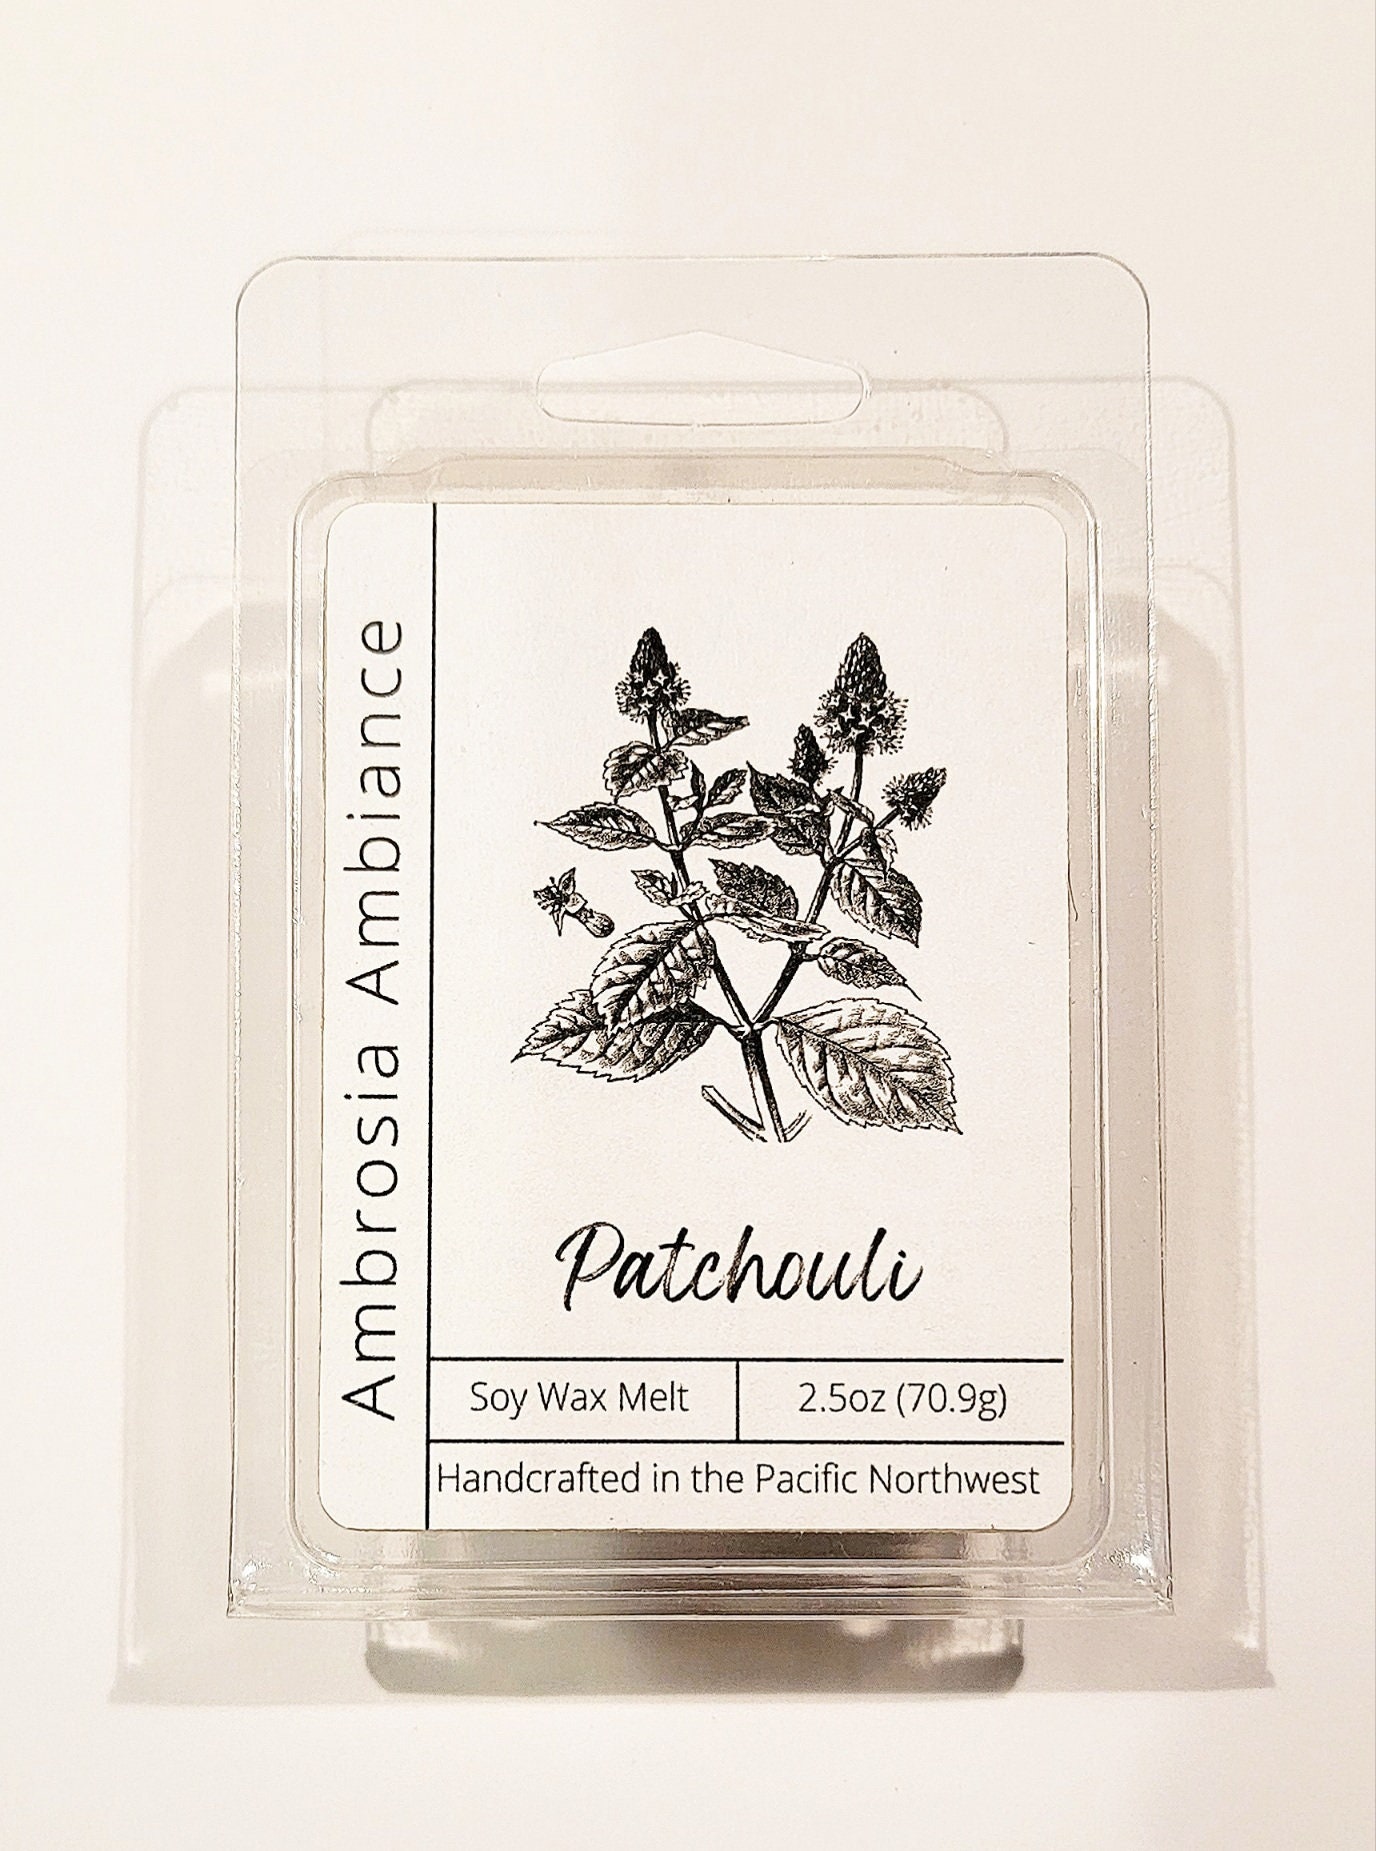 Patchouli Sandalwood Wax Melts by Candlecopia®, 2 Pack